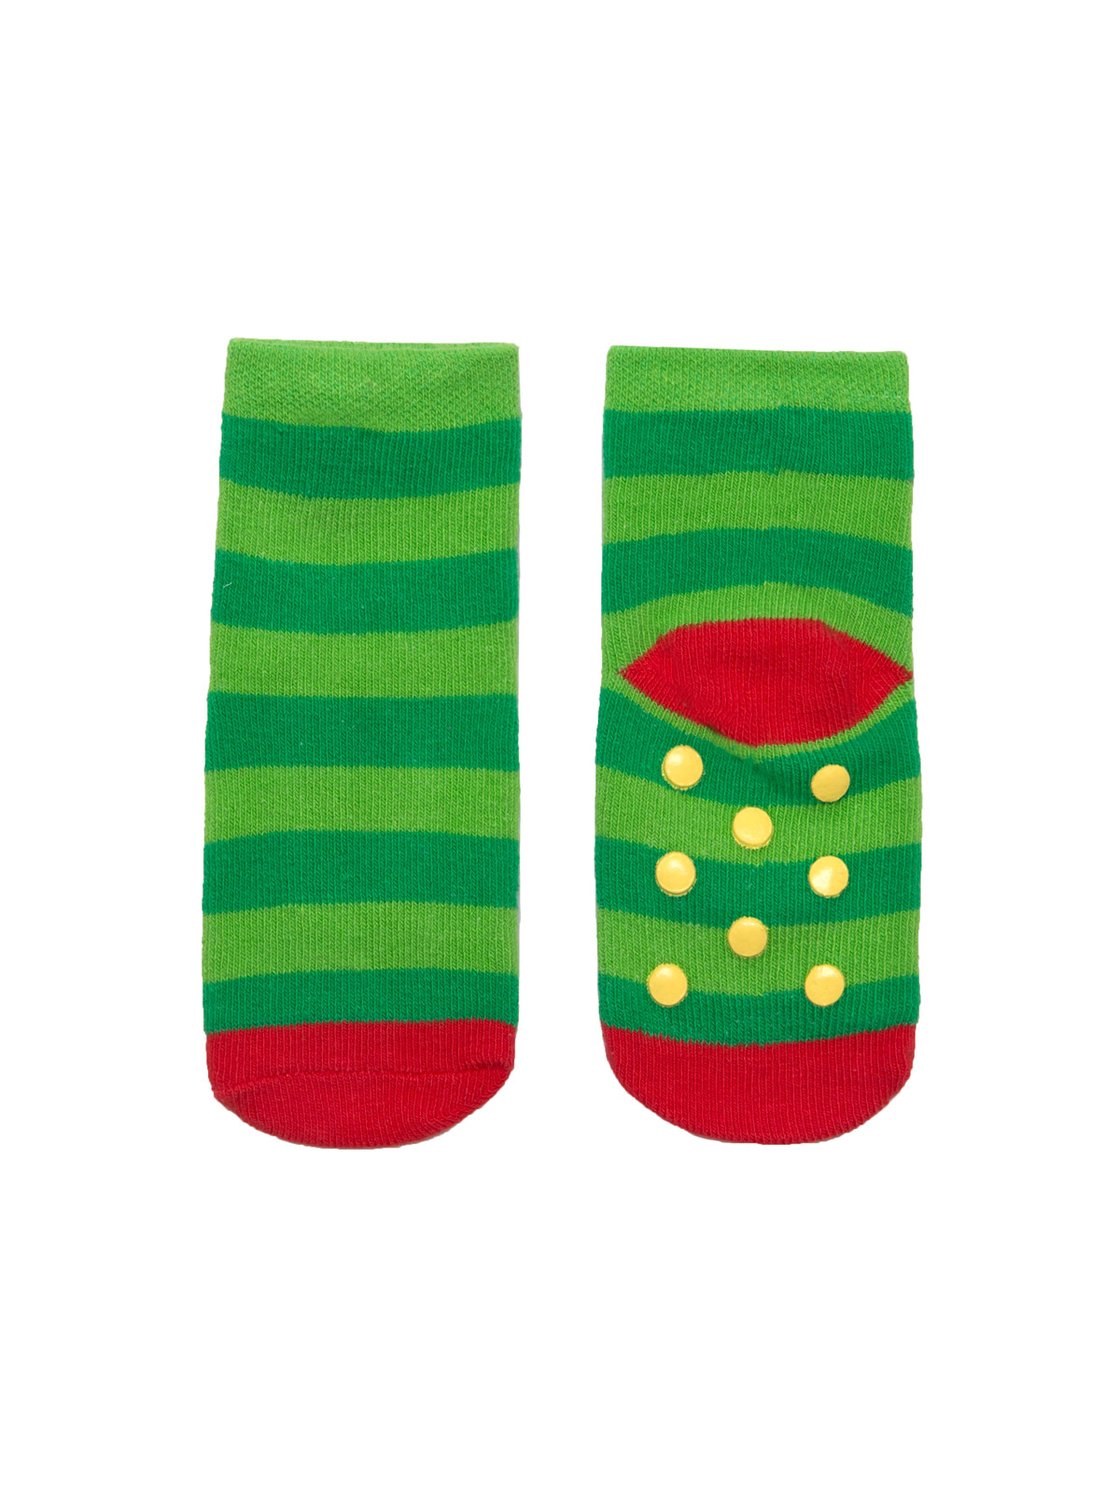 Shown from the front and back, a light and dark green striped sock with a red heel and toe. They also feature rubber grips on the foot.